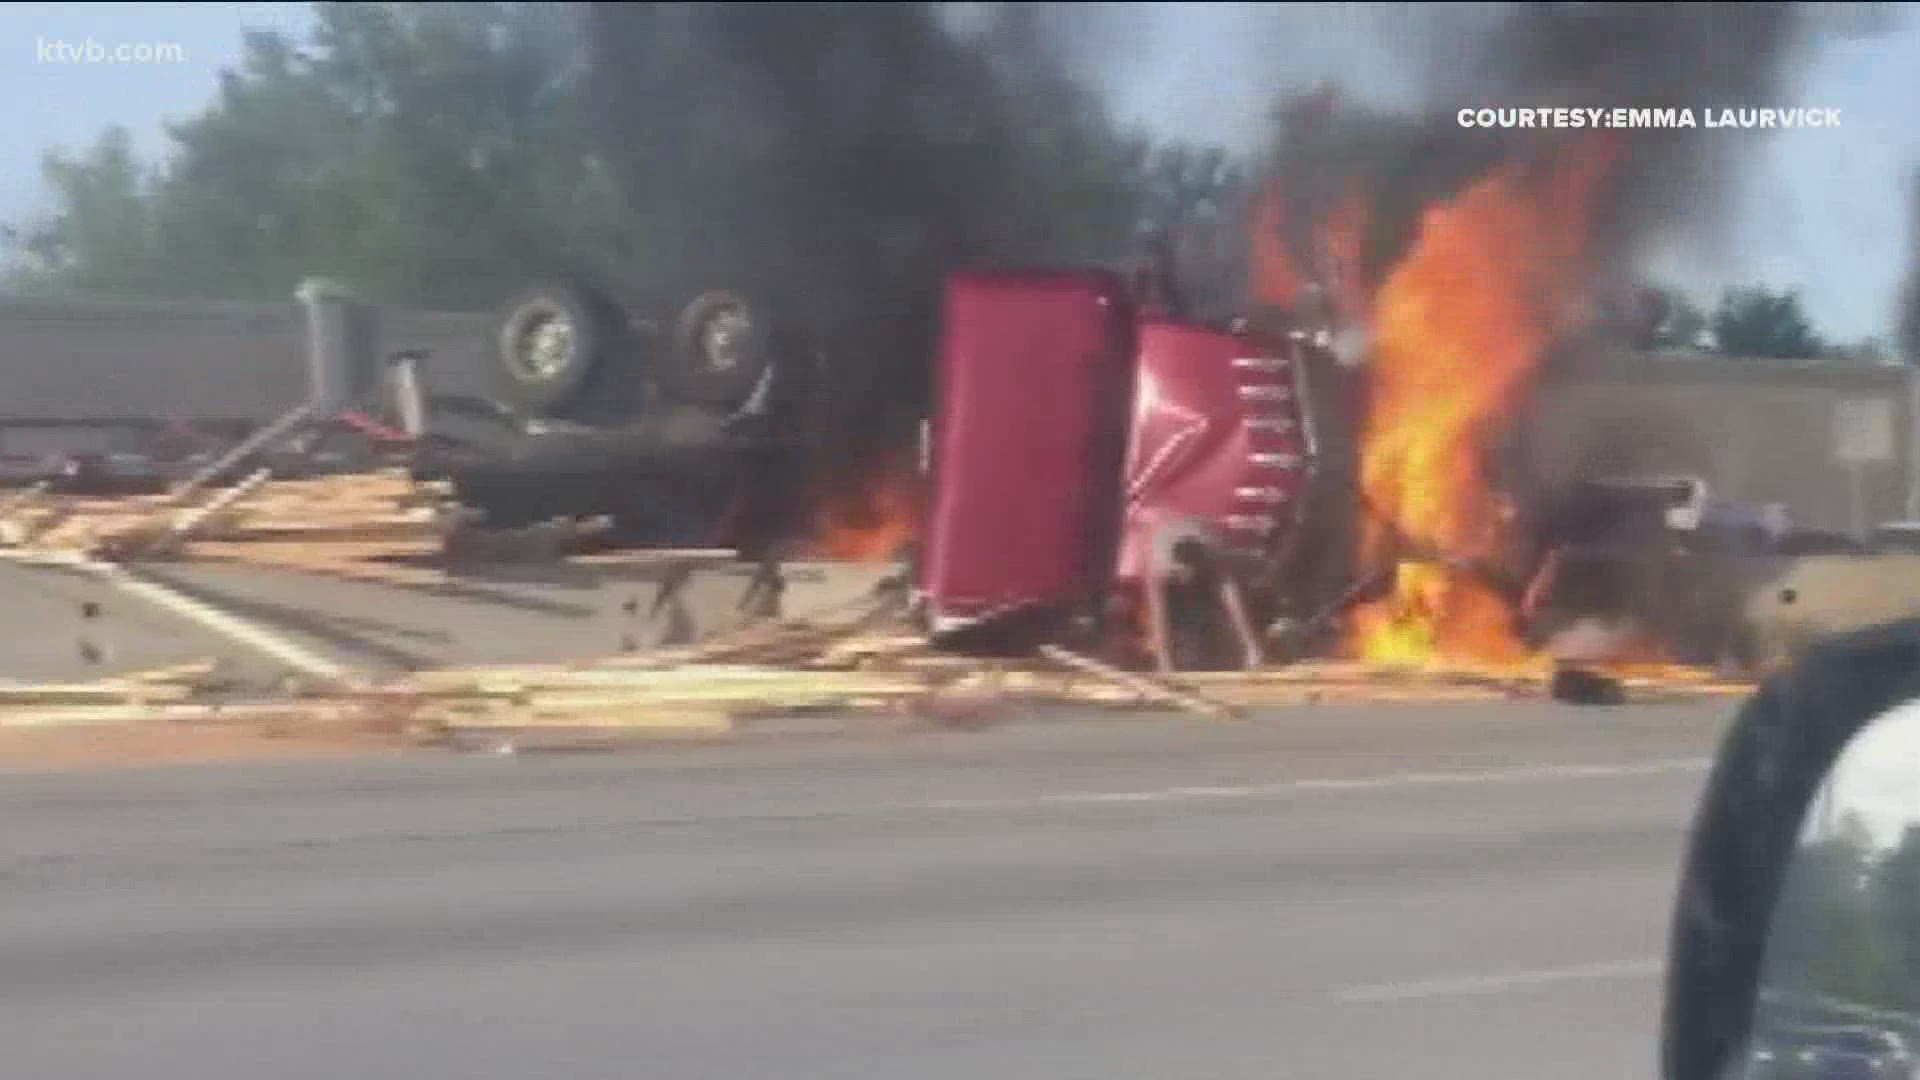 A viewer drove by the fiery crash just as a man was leaping from the truck cabin to safety.